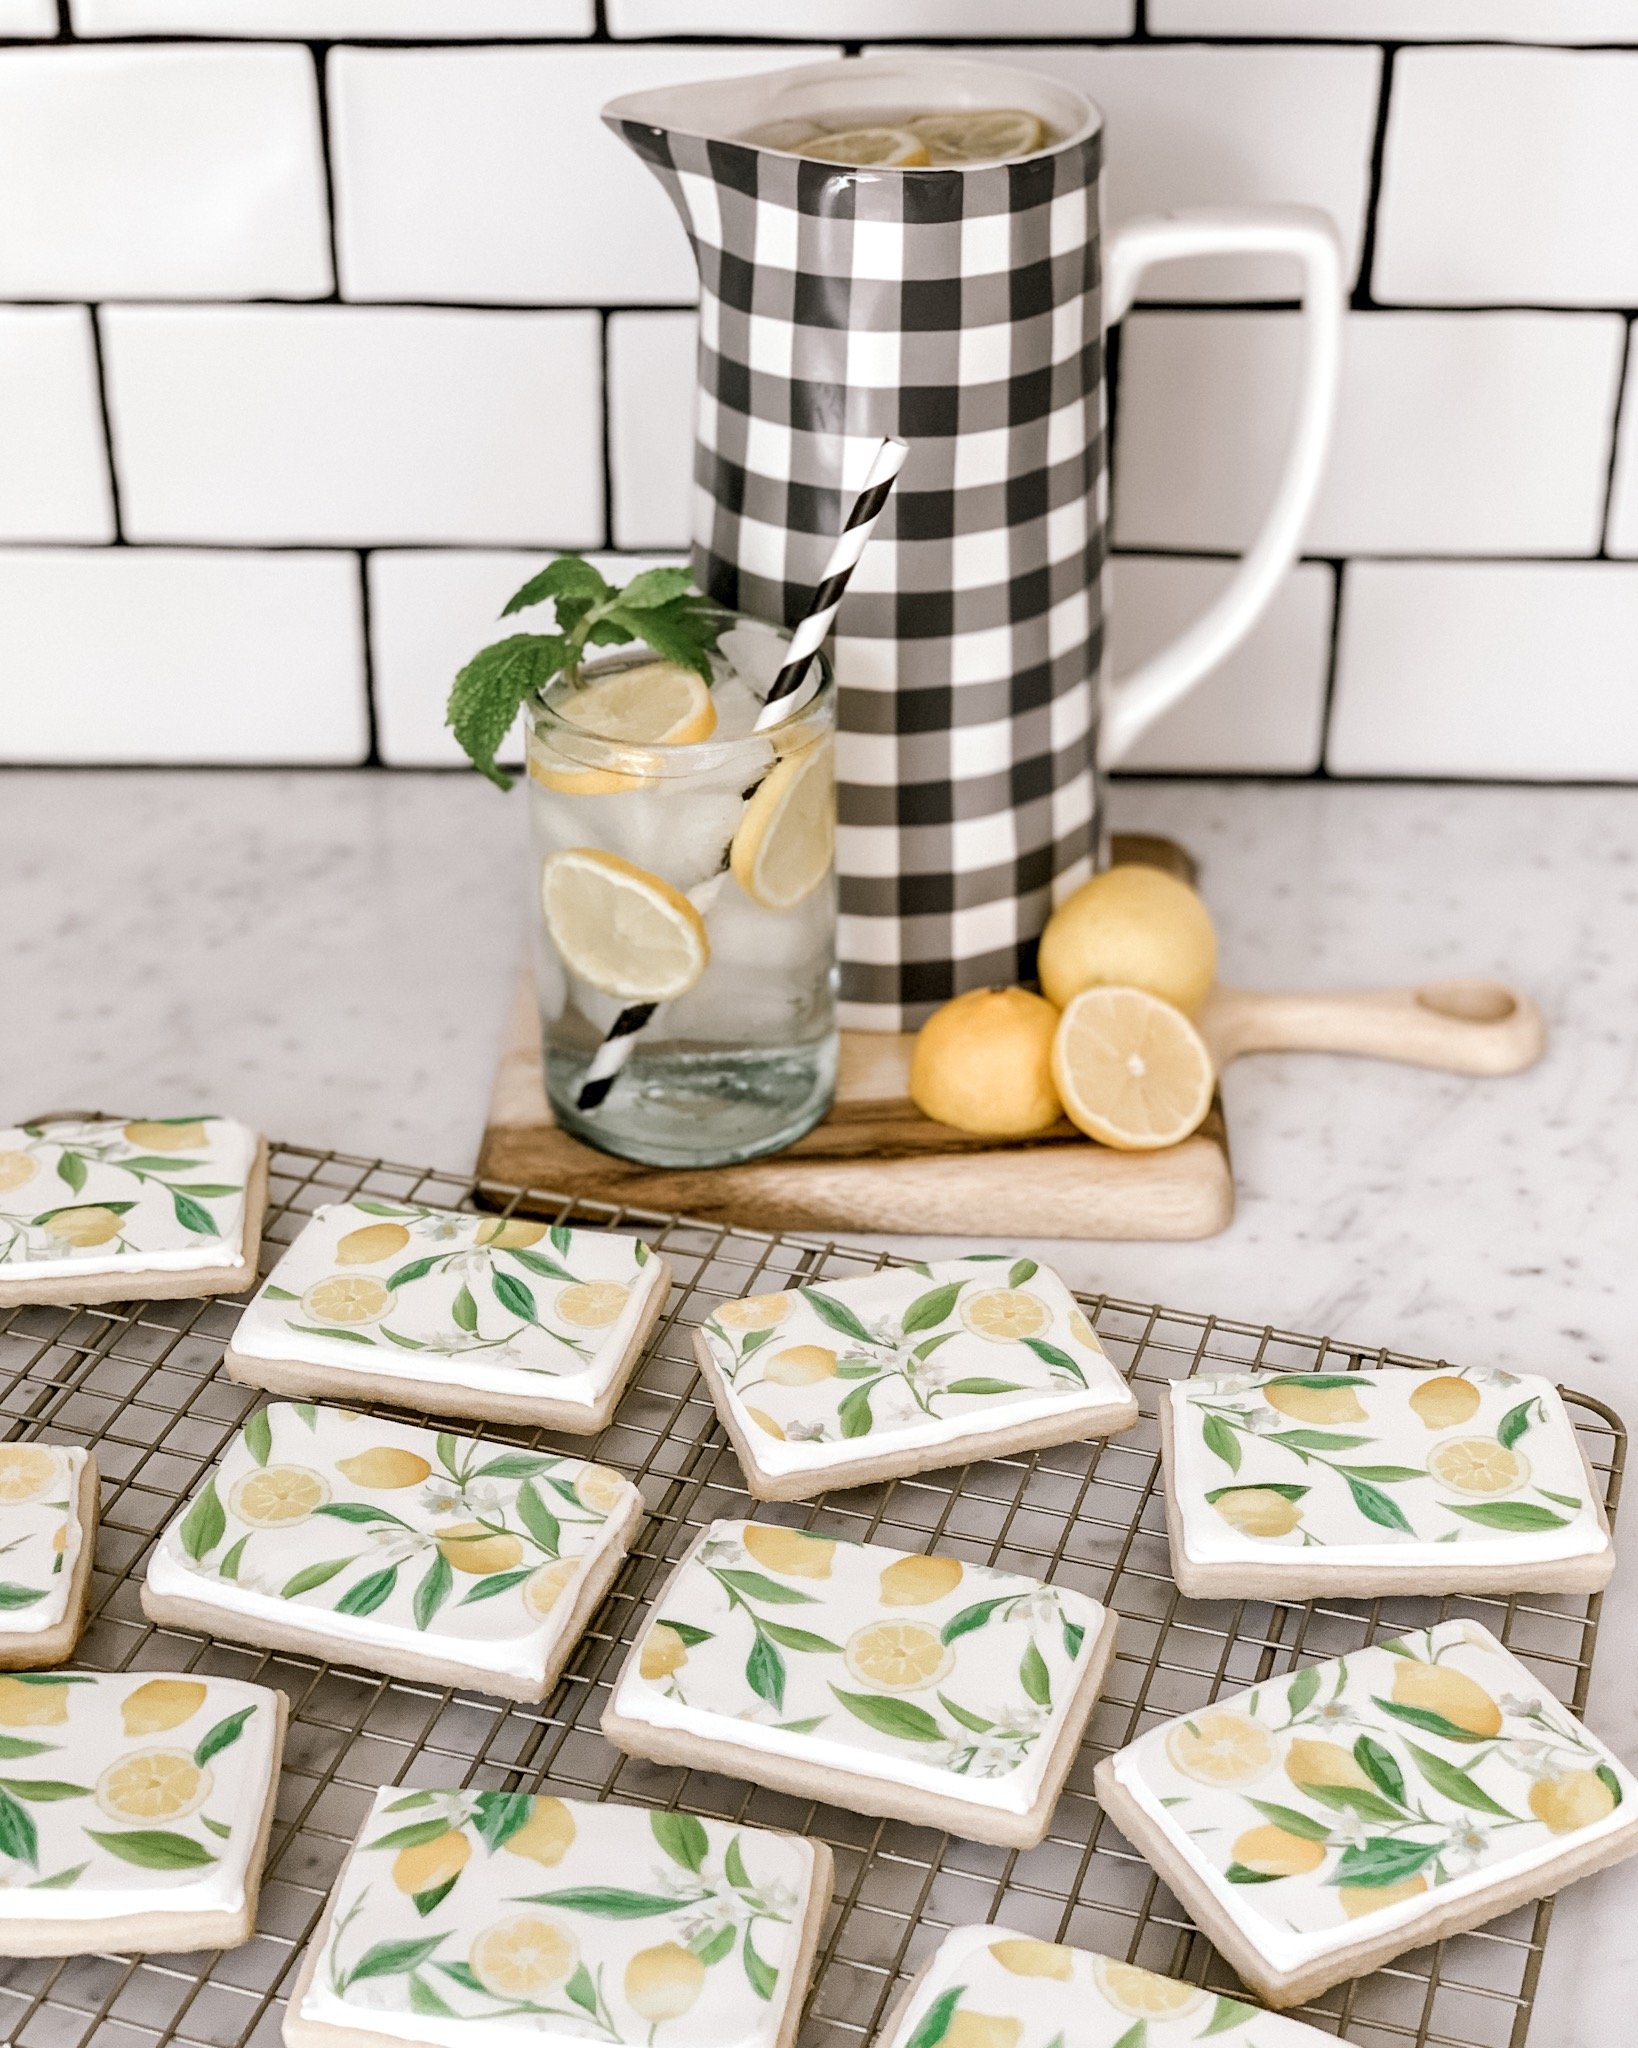 Royal Iced Cookies with Wafer Paper - Jaclyn James Company